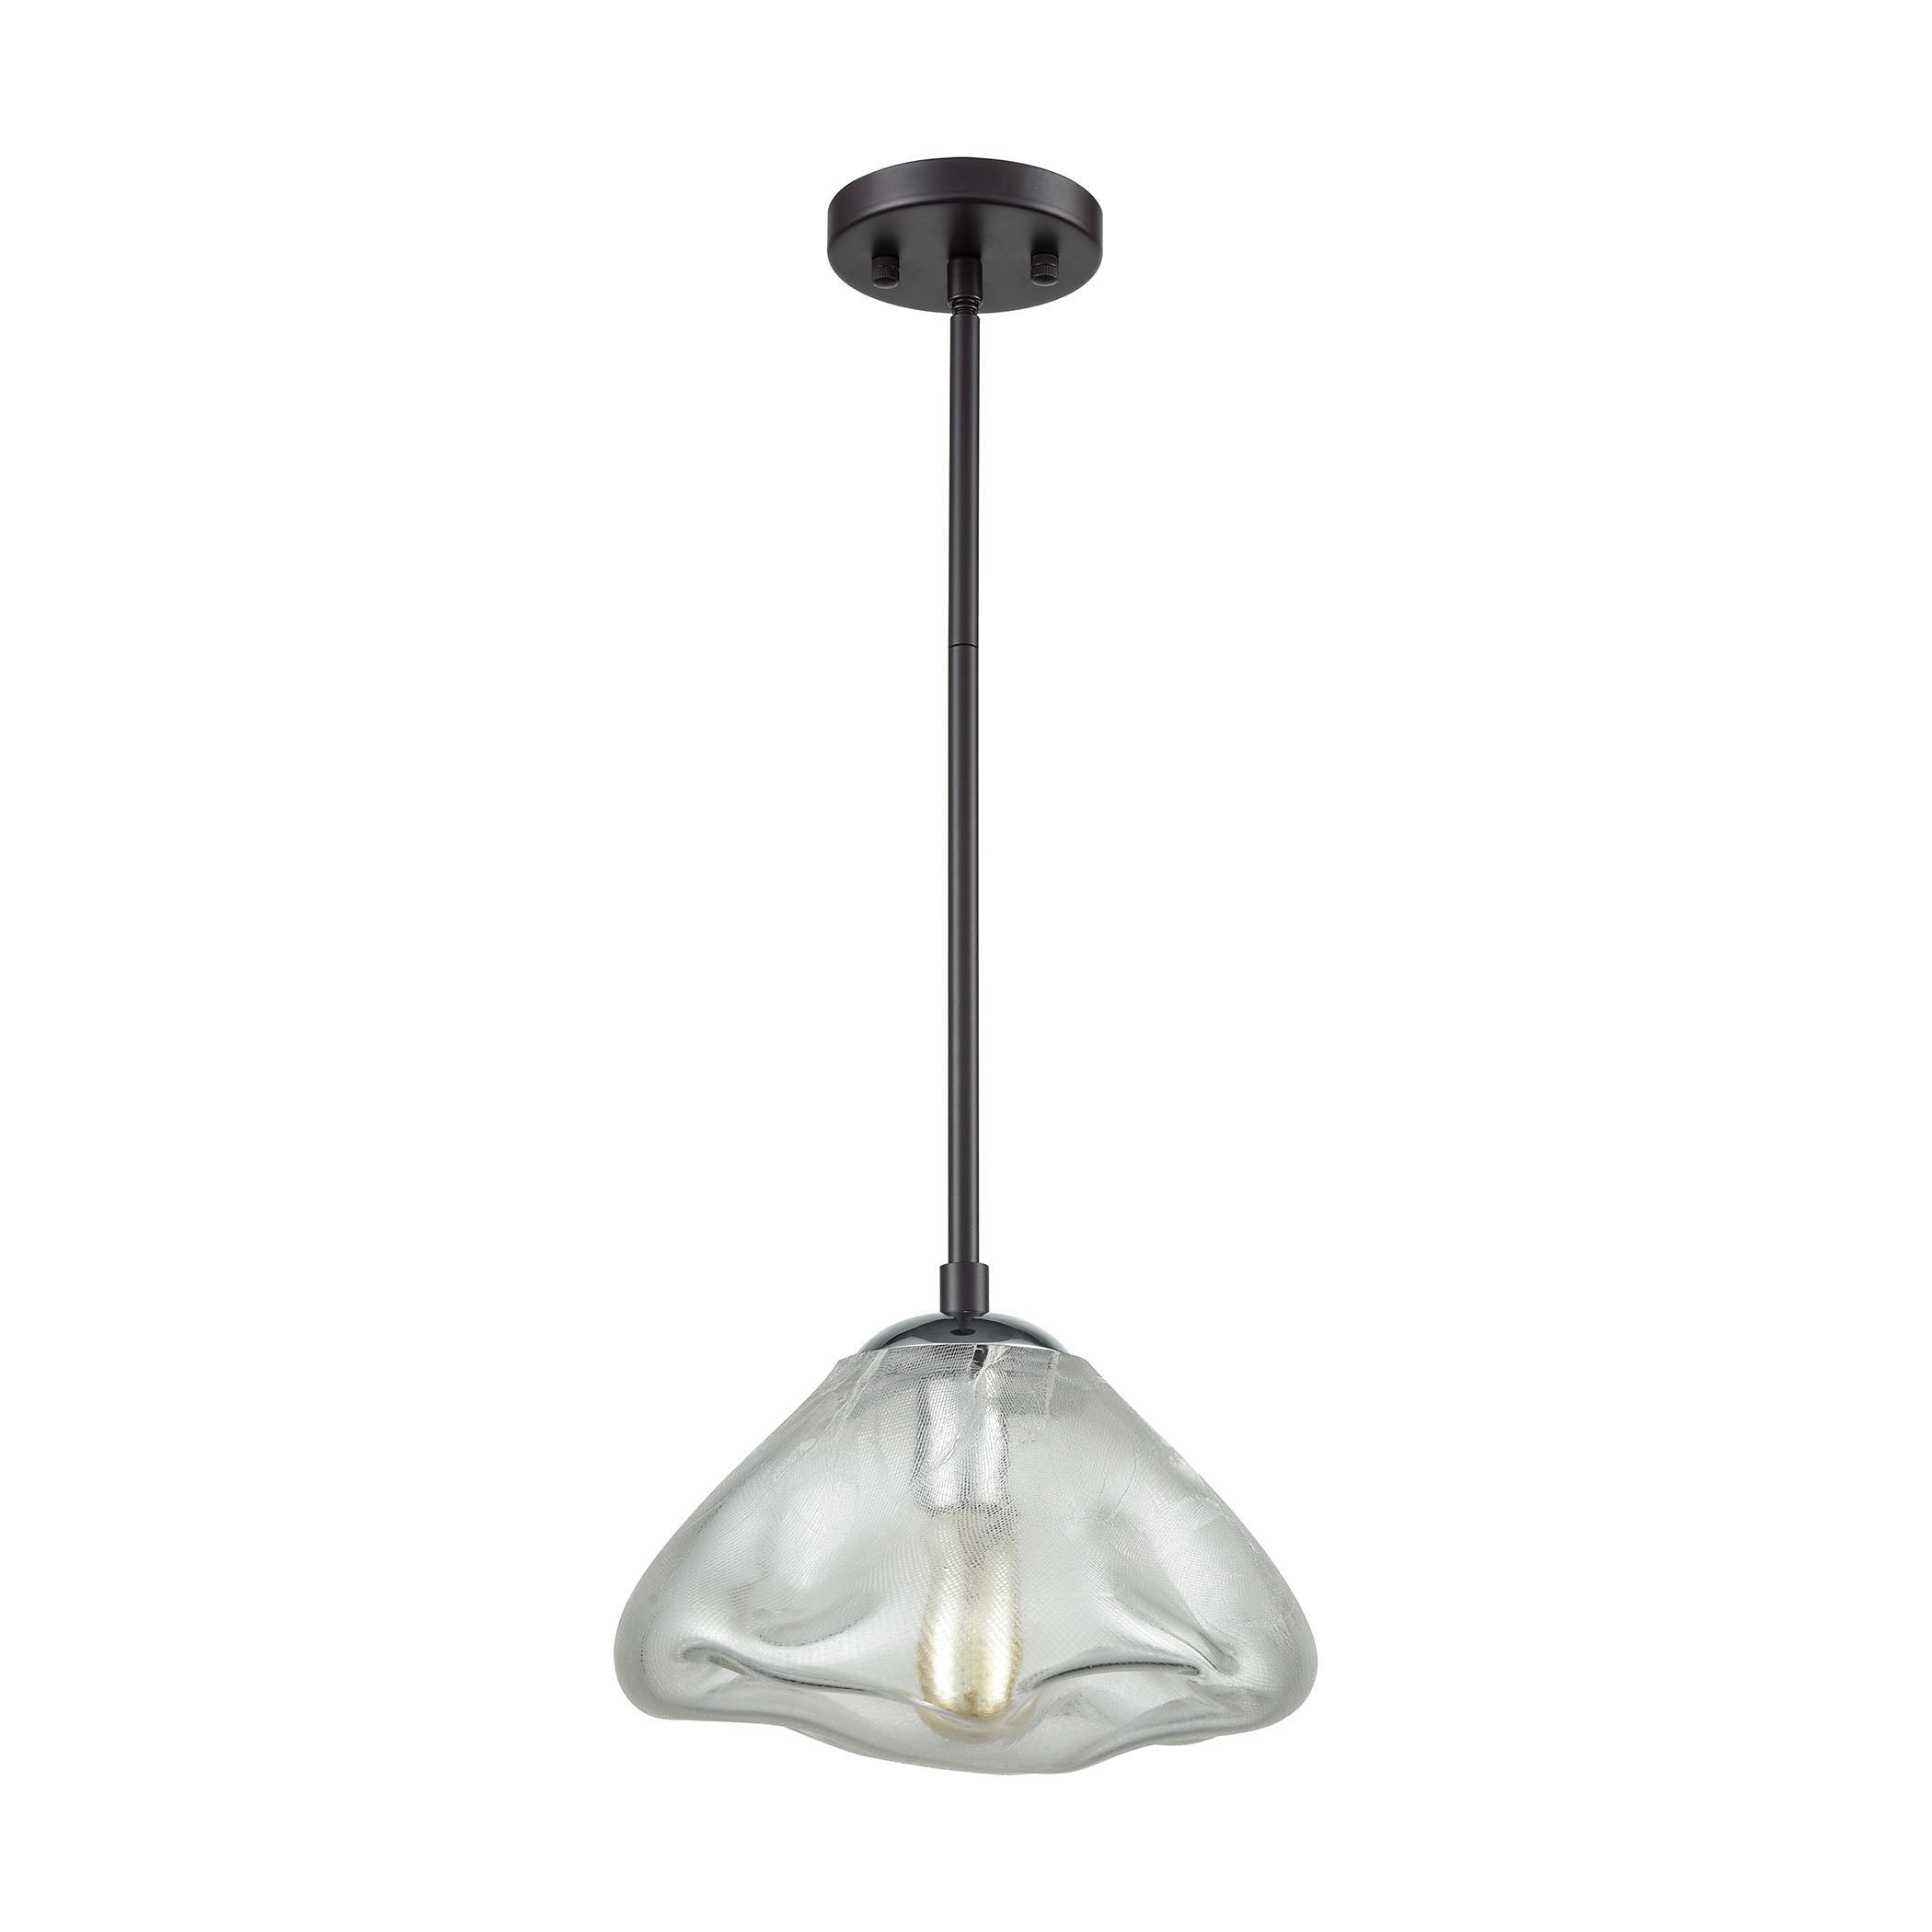 ELK Lighting 15330/1 Kendal 1-Light Mini Pendant in Oil Rubbed Bronze and Polished Chrome with Freeform Glass